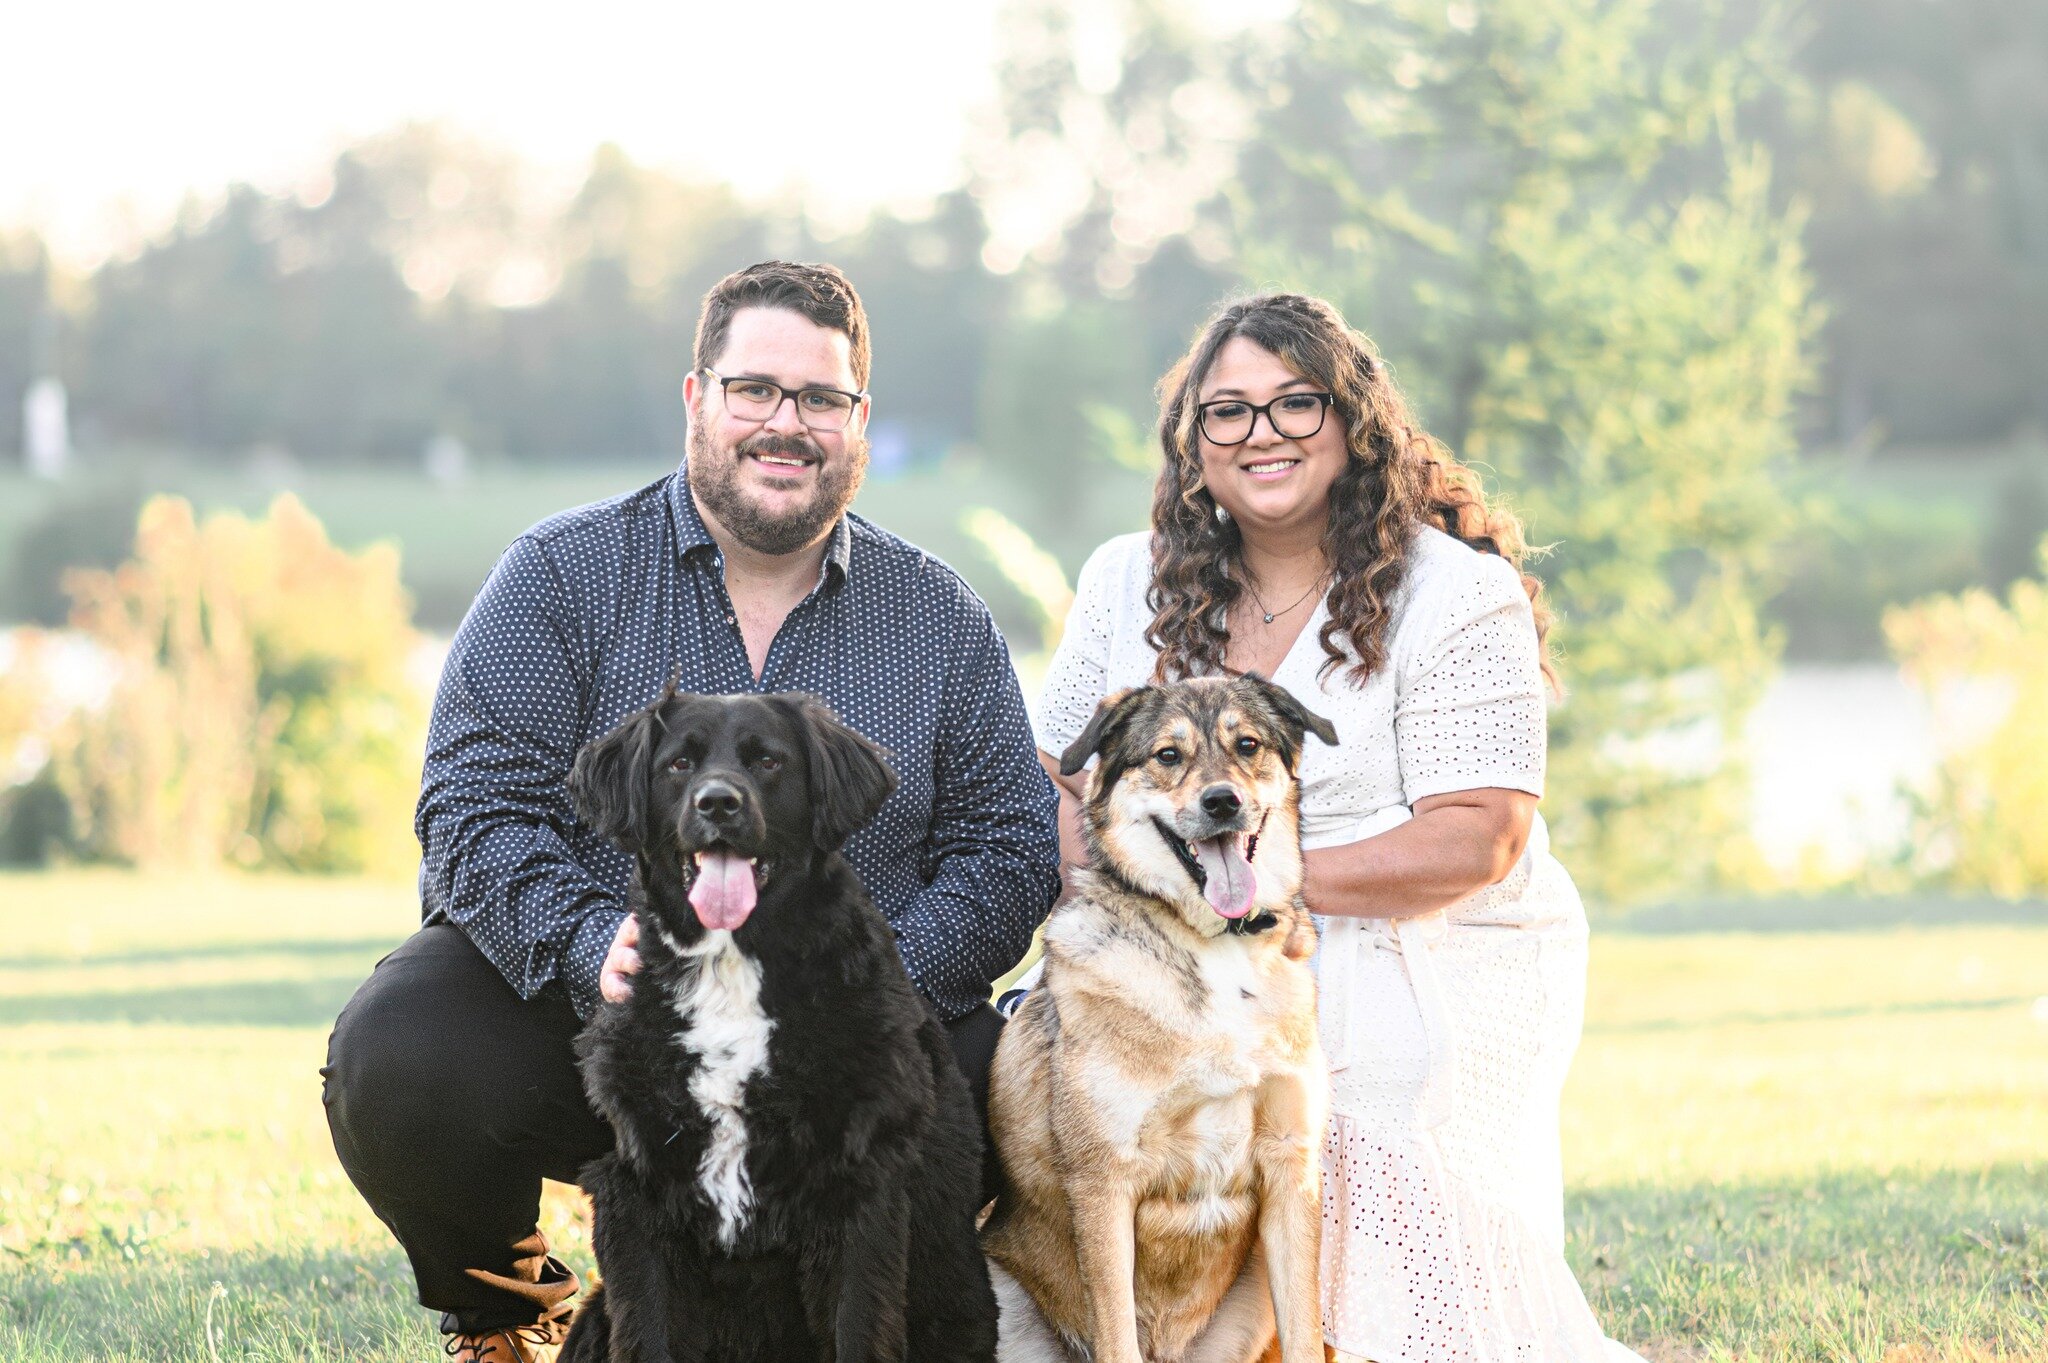 Since it's my birthday today, I thought it would be fitting to share a few things about myself that most of you might not know.

1) I am 29 years old today.
2) I am an only child.
3) I have two dogs who are my children - Bella is the black one and Gi